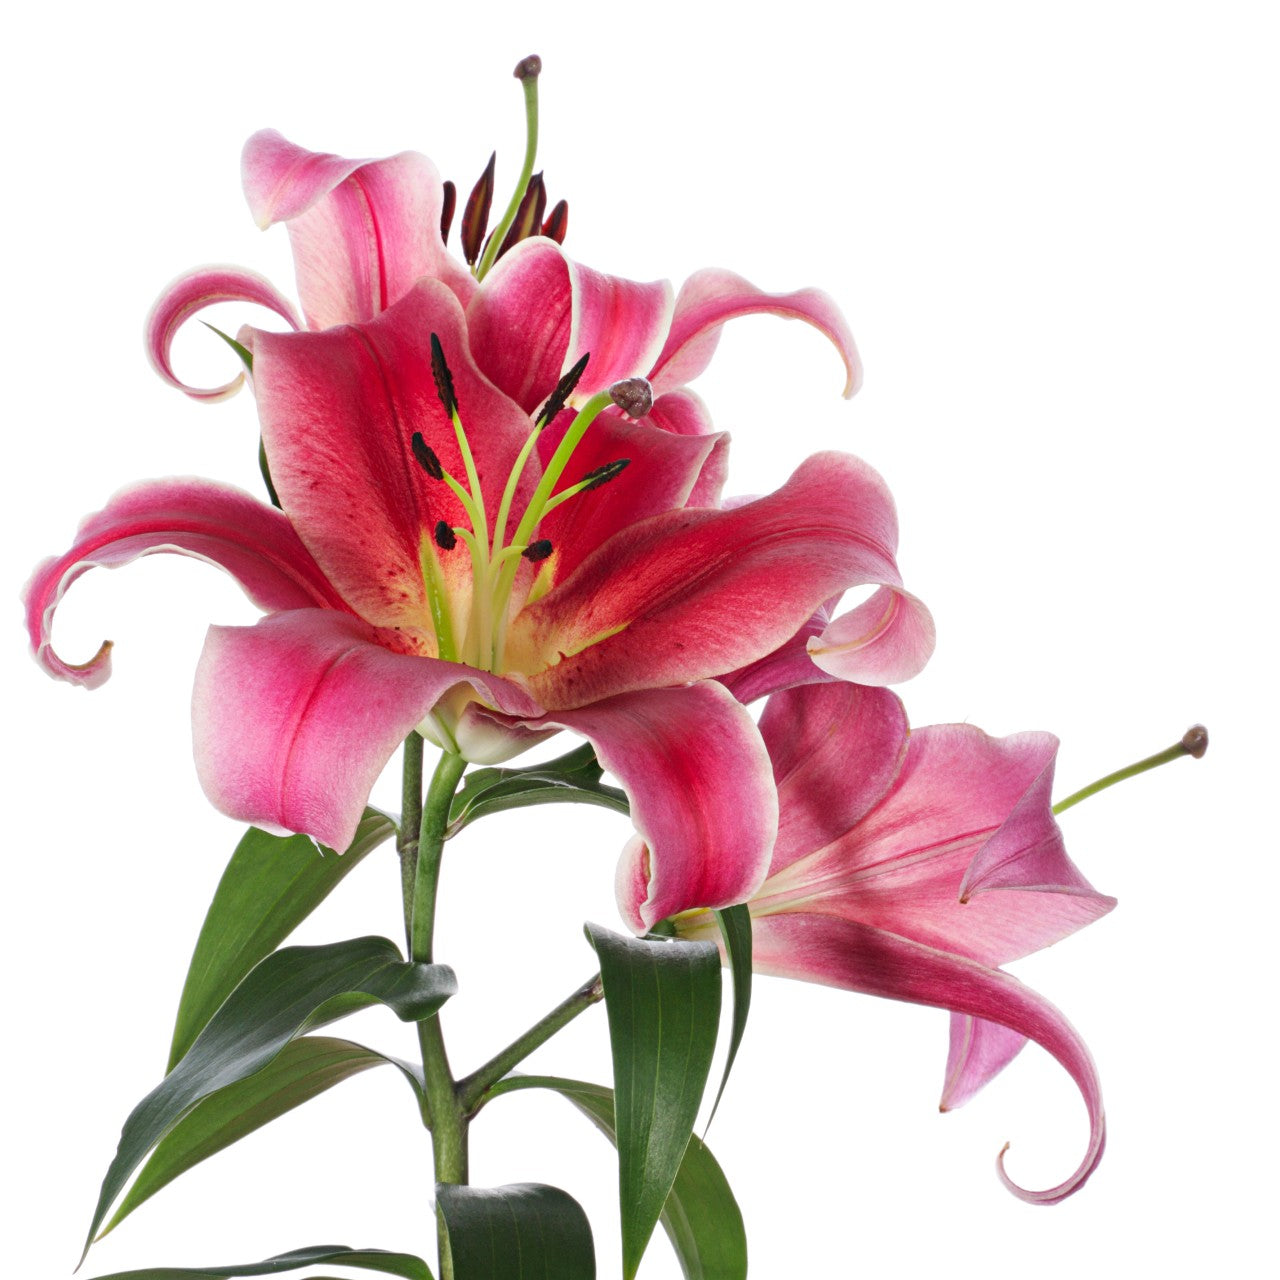 Asiatic Lilies - Bulk – Flowers For Fundraising